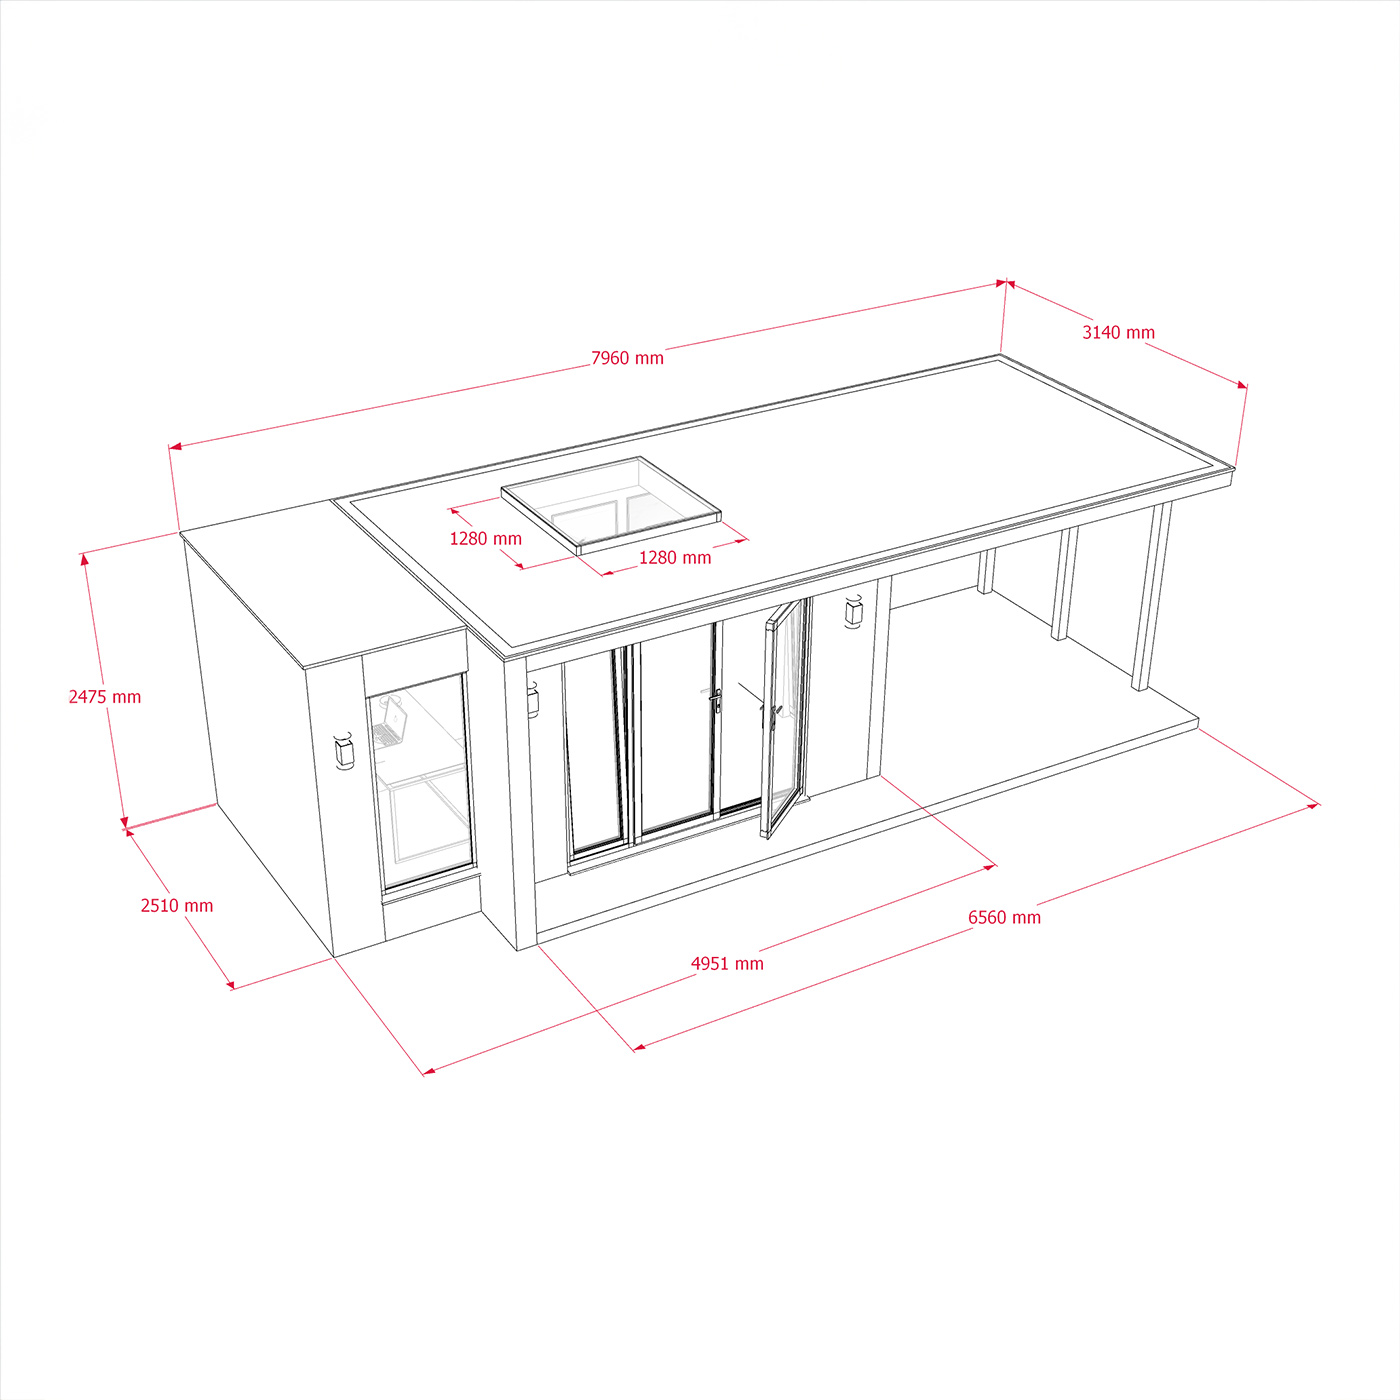 Exterior dimensions of 2.6m by 5.0m garden office